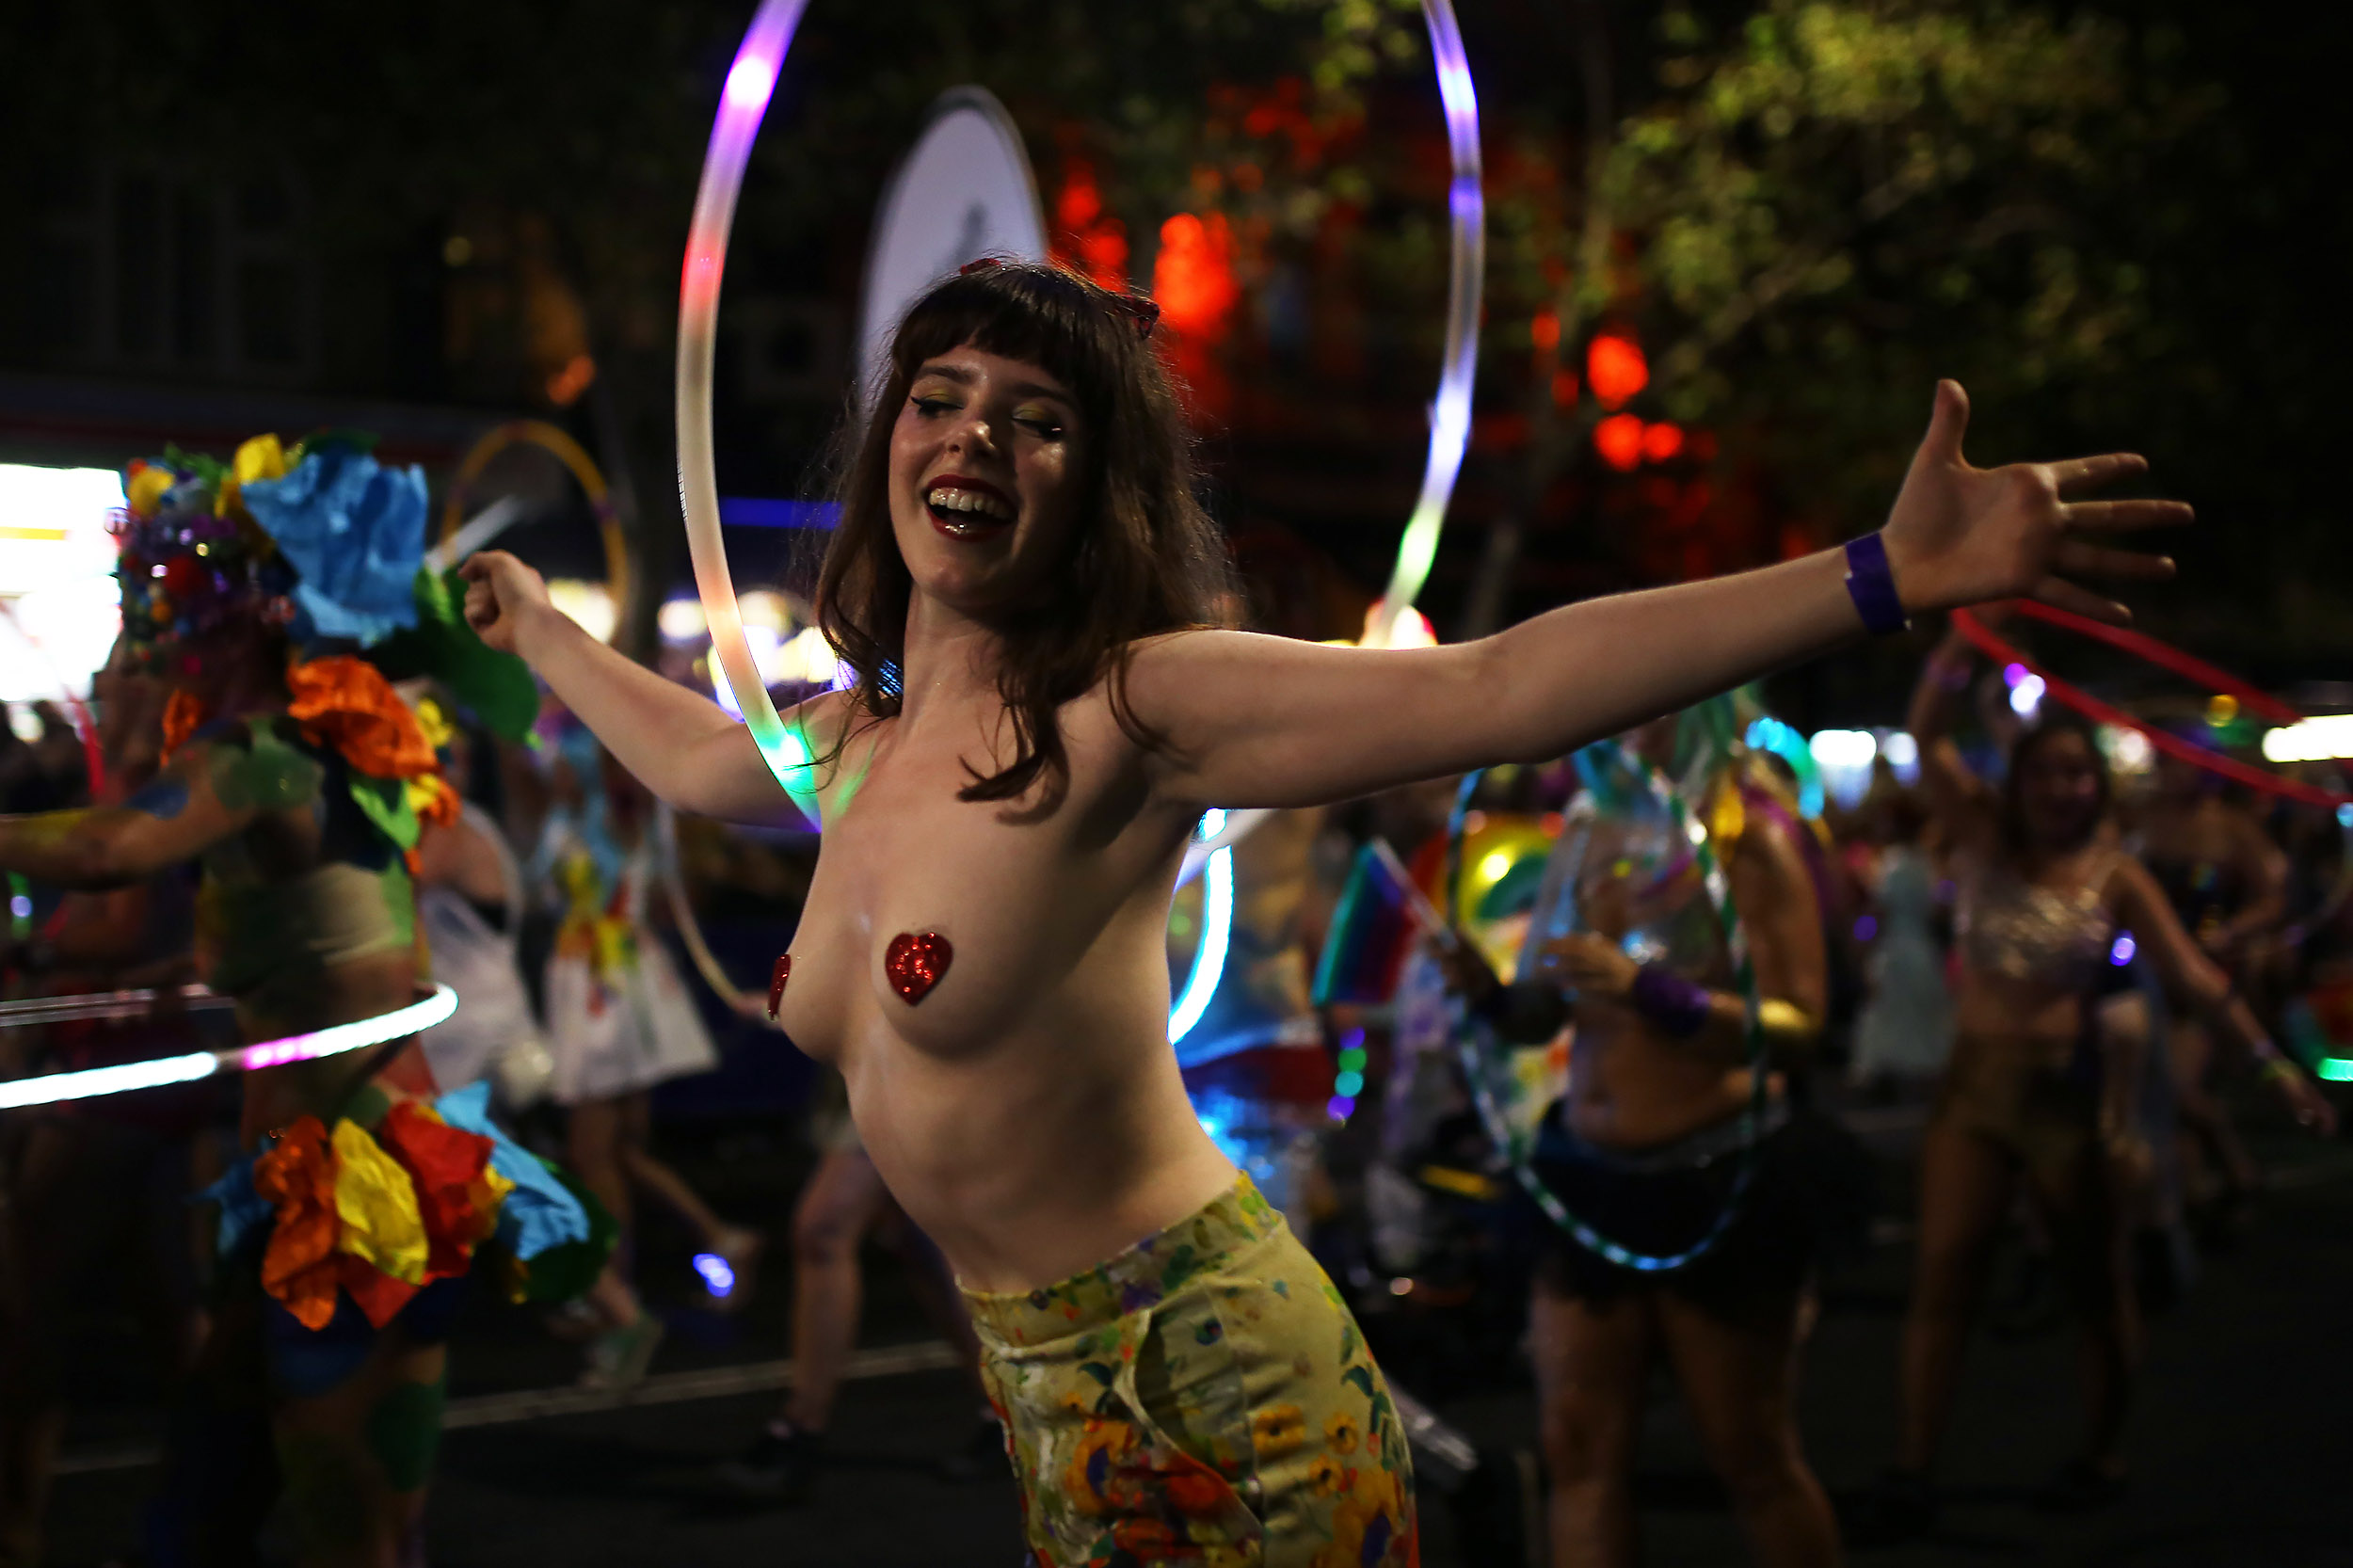  A woman dances with a hula hoop during the annual Sydney Gay and Lesbian Mardi Gras parade in Sydney, Australia March 4, 2017. 